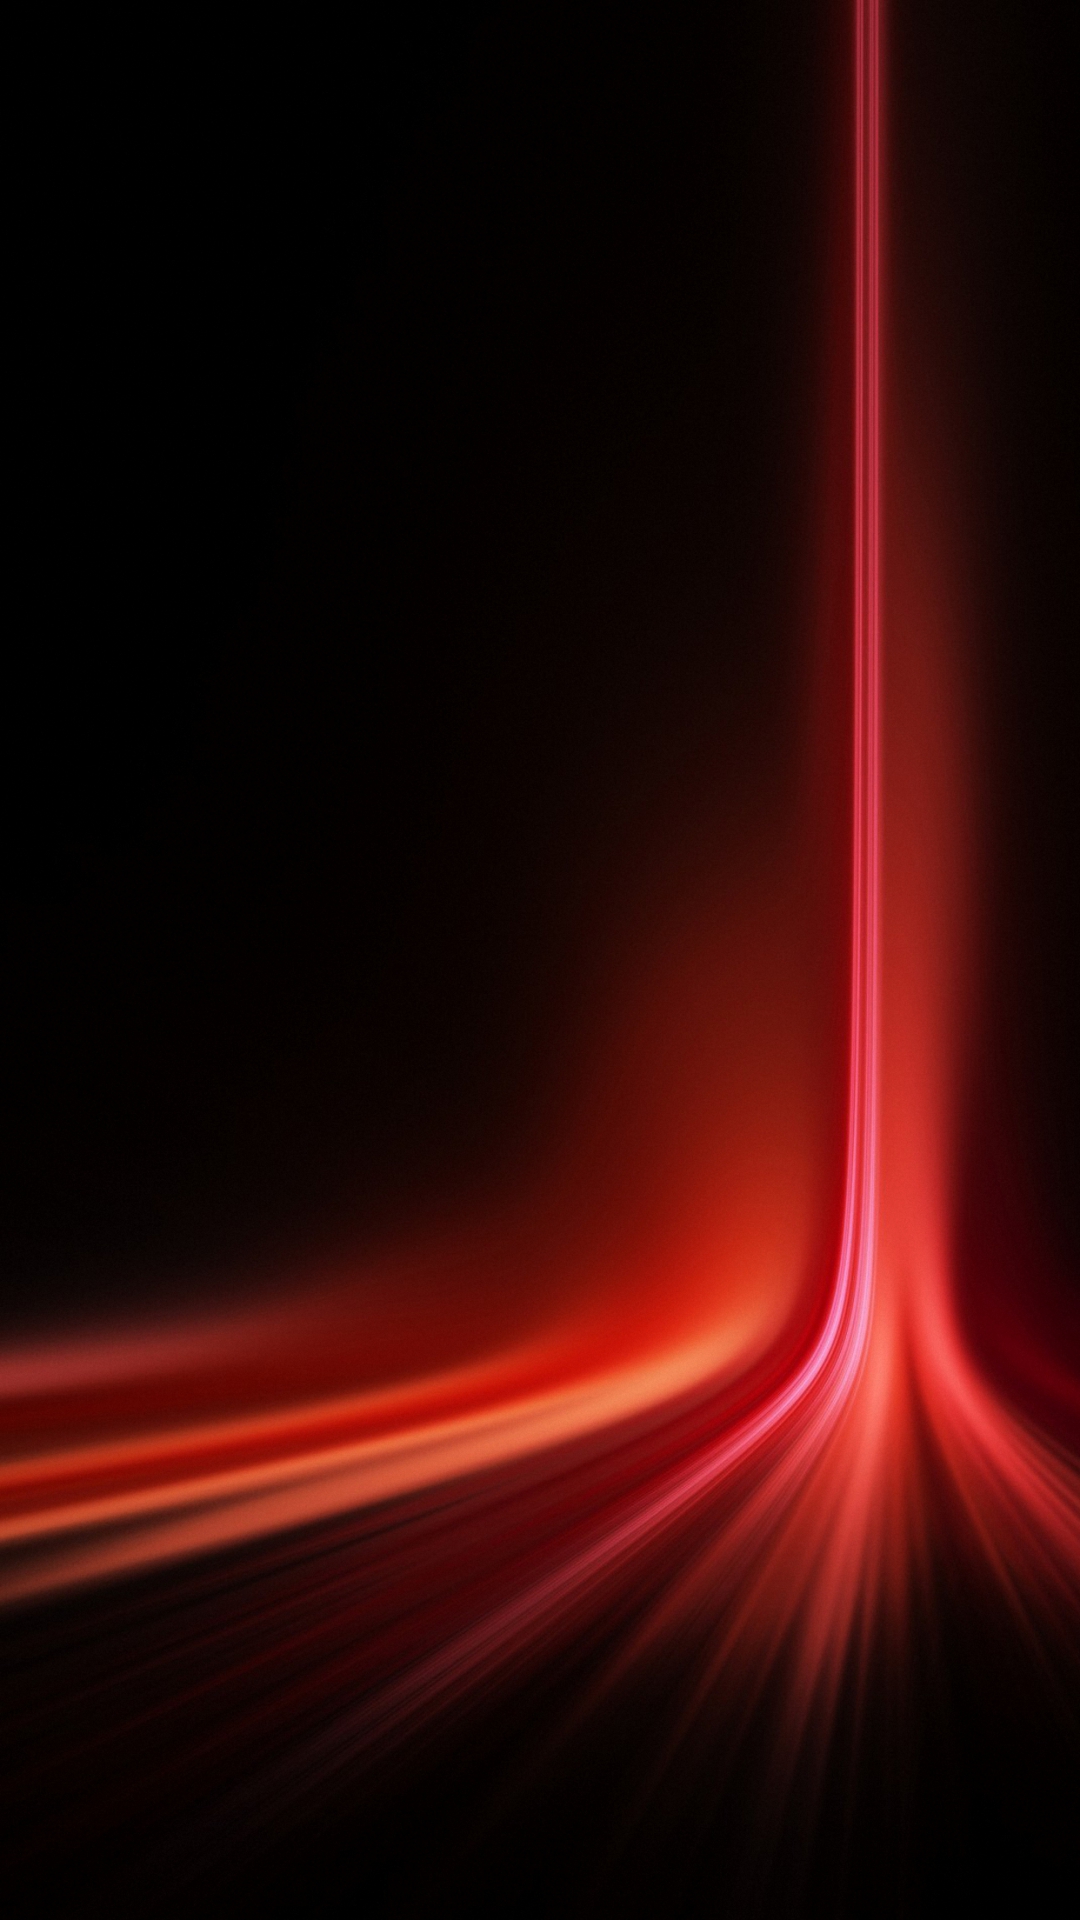 Free Download 1080x19 Red Lines Iphone 6s Plus Wallpaper Hd 1080x19 For Your Desktop Mobile Tablet Explore 49 Iphone 6s Plus Wallpaper Iphone 6 Wallpaper Size Iphone 6 Wallpaper Iphone 5s Wallpaper